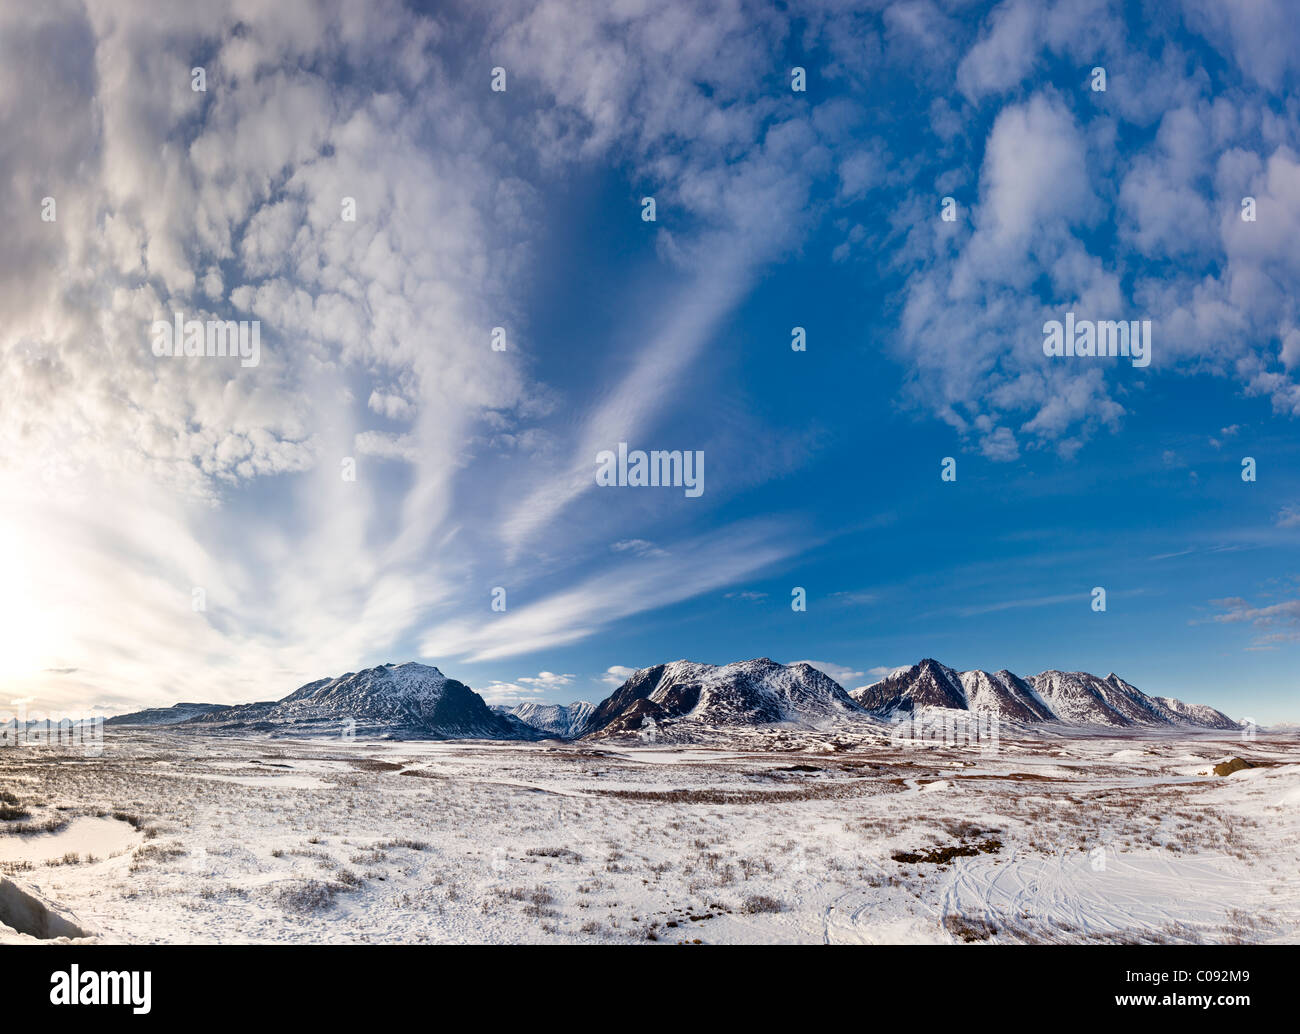 View of clouds from an approaching storm system starting to converge over MacLaren Summit along the Denali Highway, Alaska Stock Photo